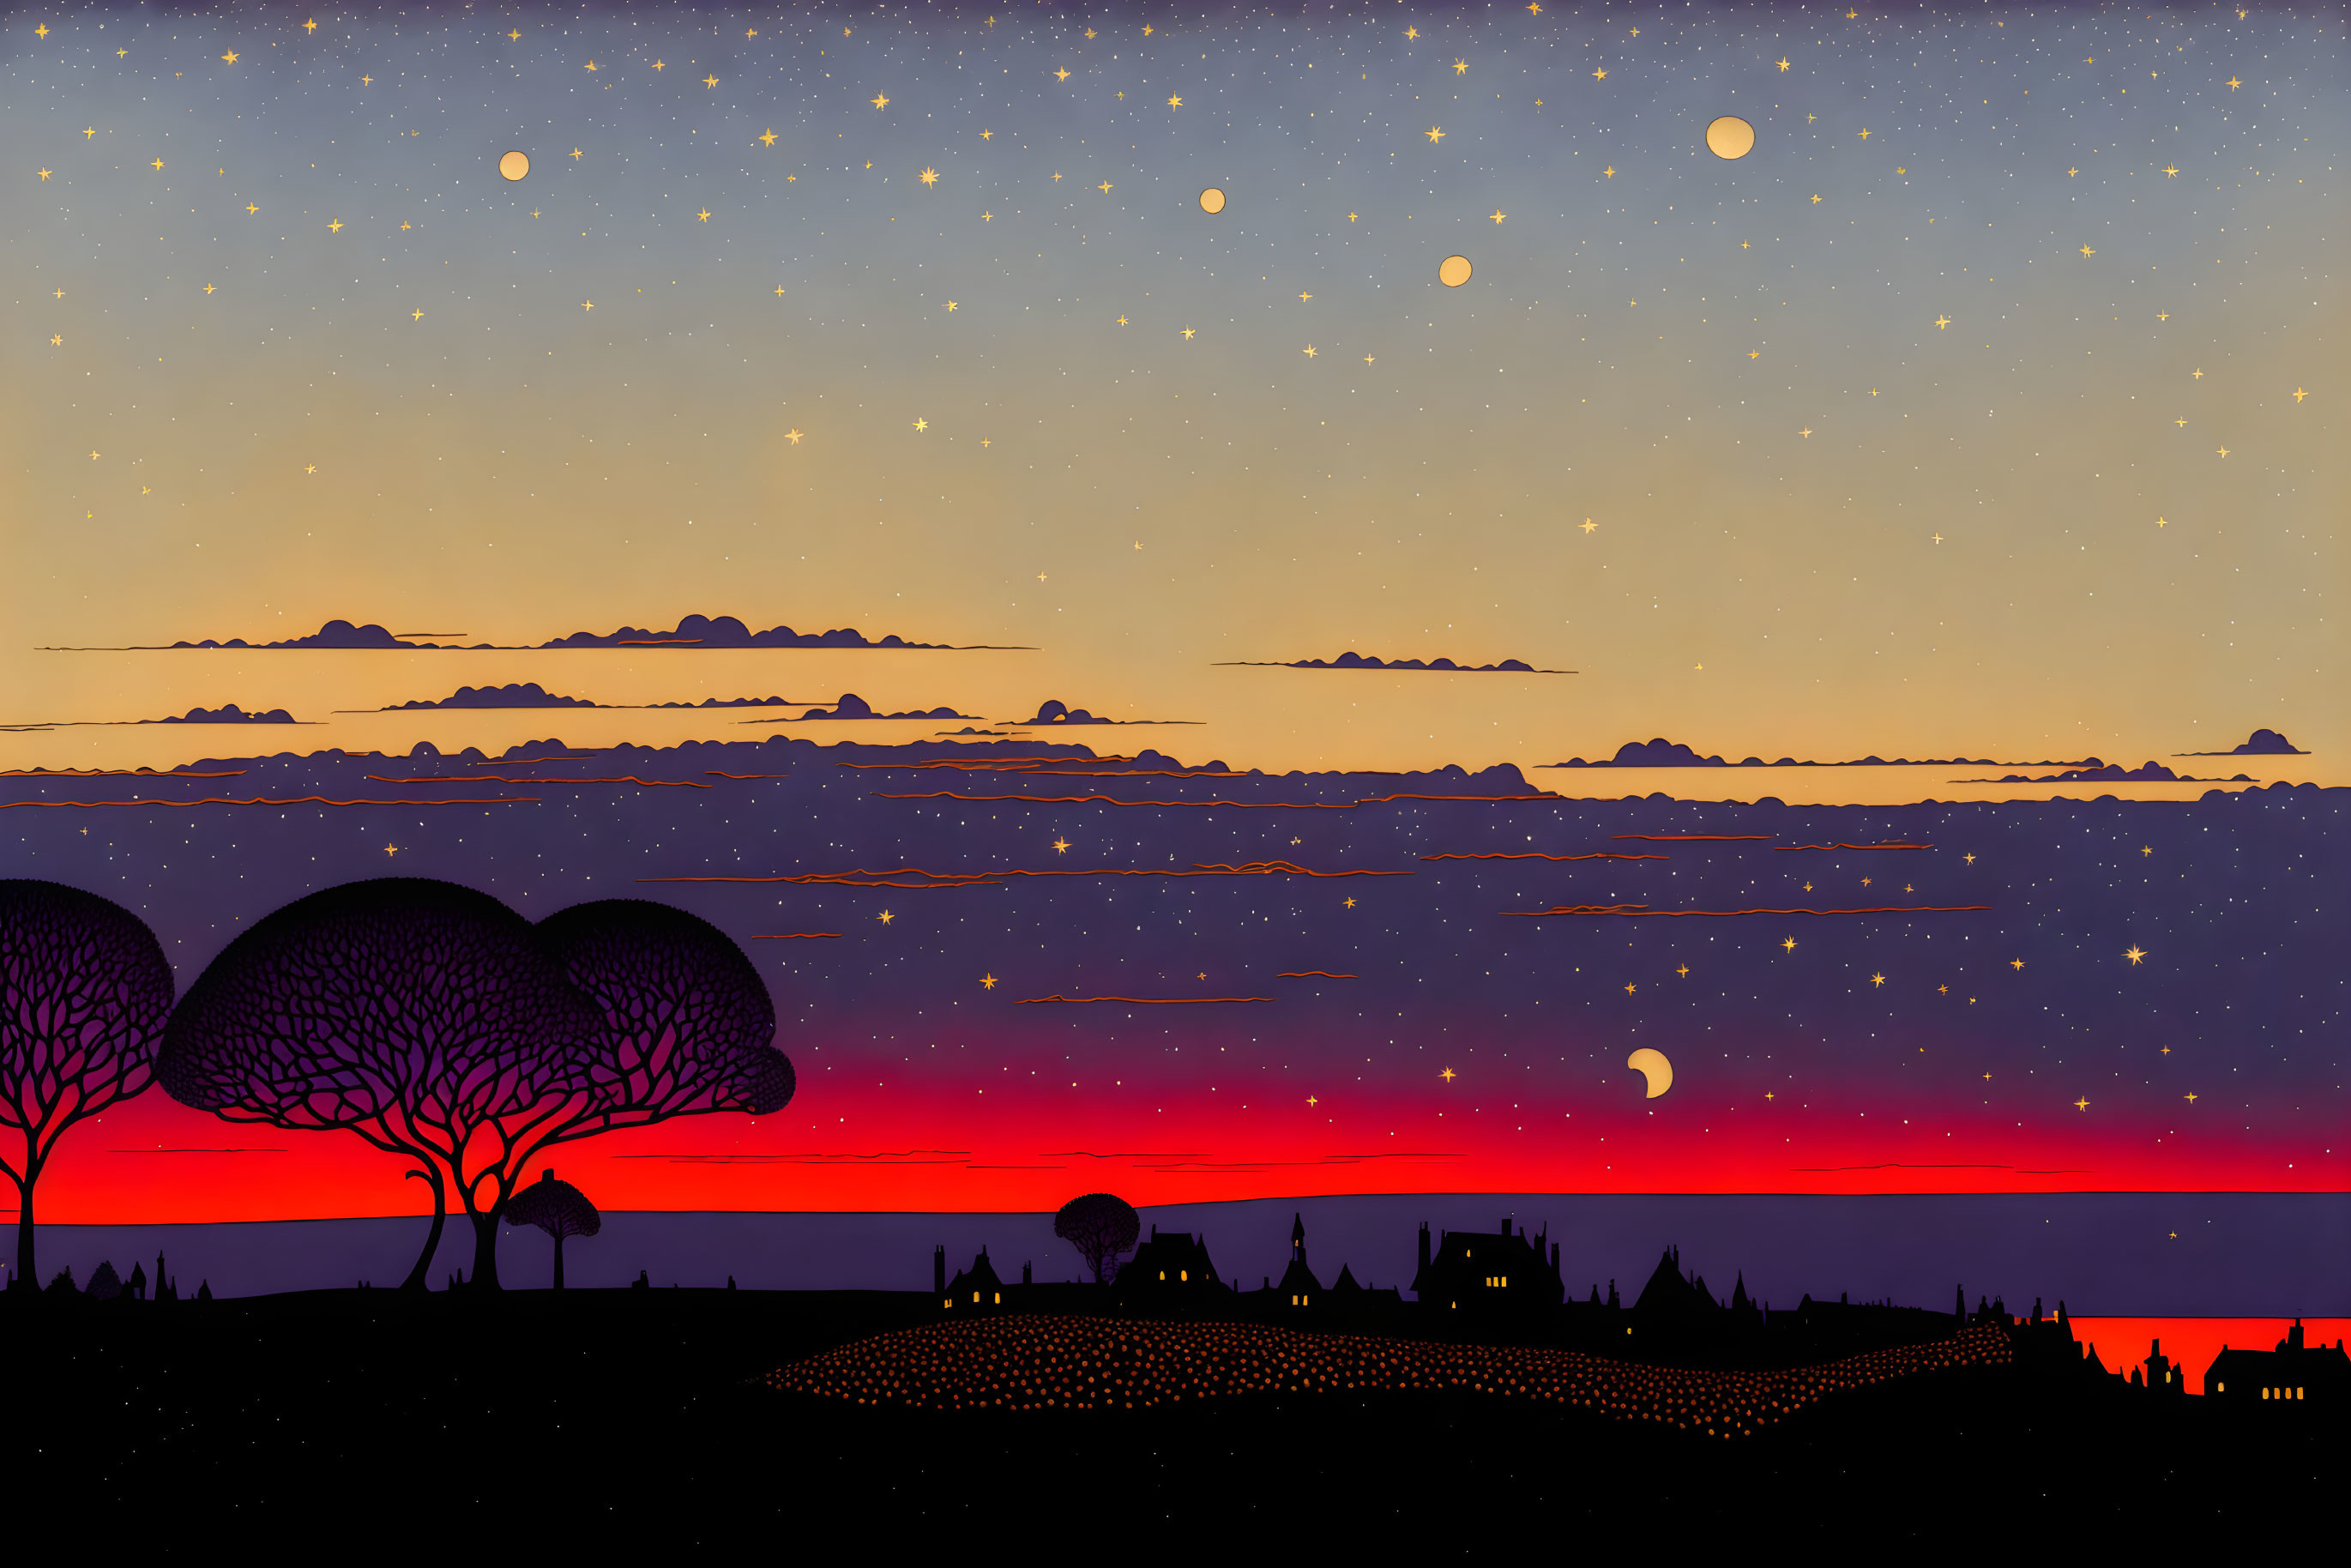 Twilight landscape with silhouetted trees, hills, village, and starry sky